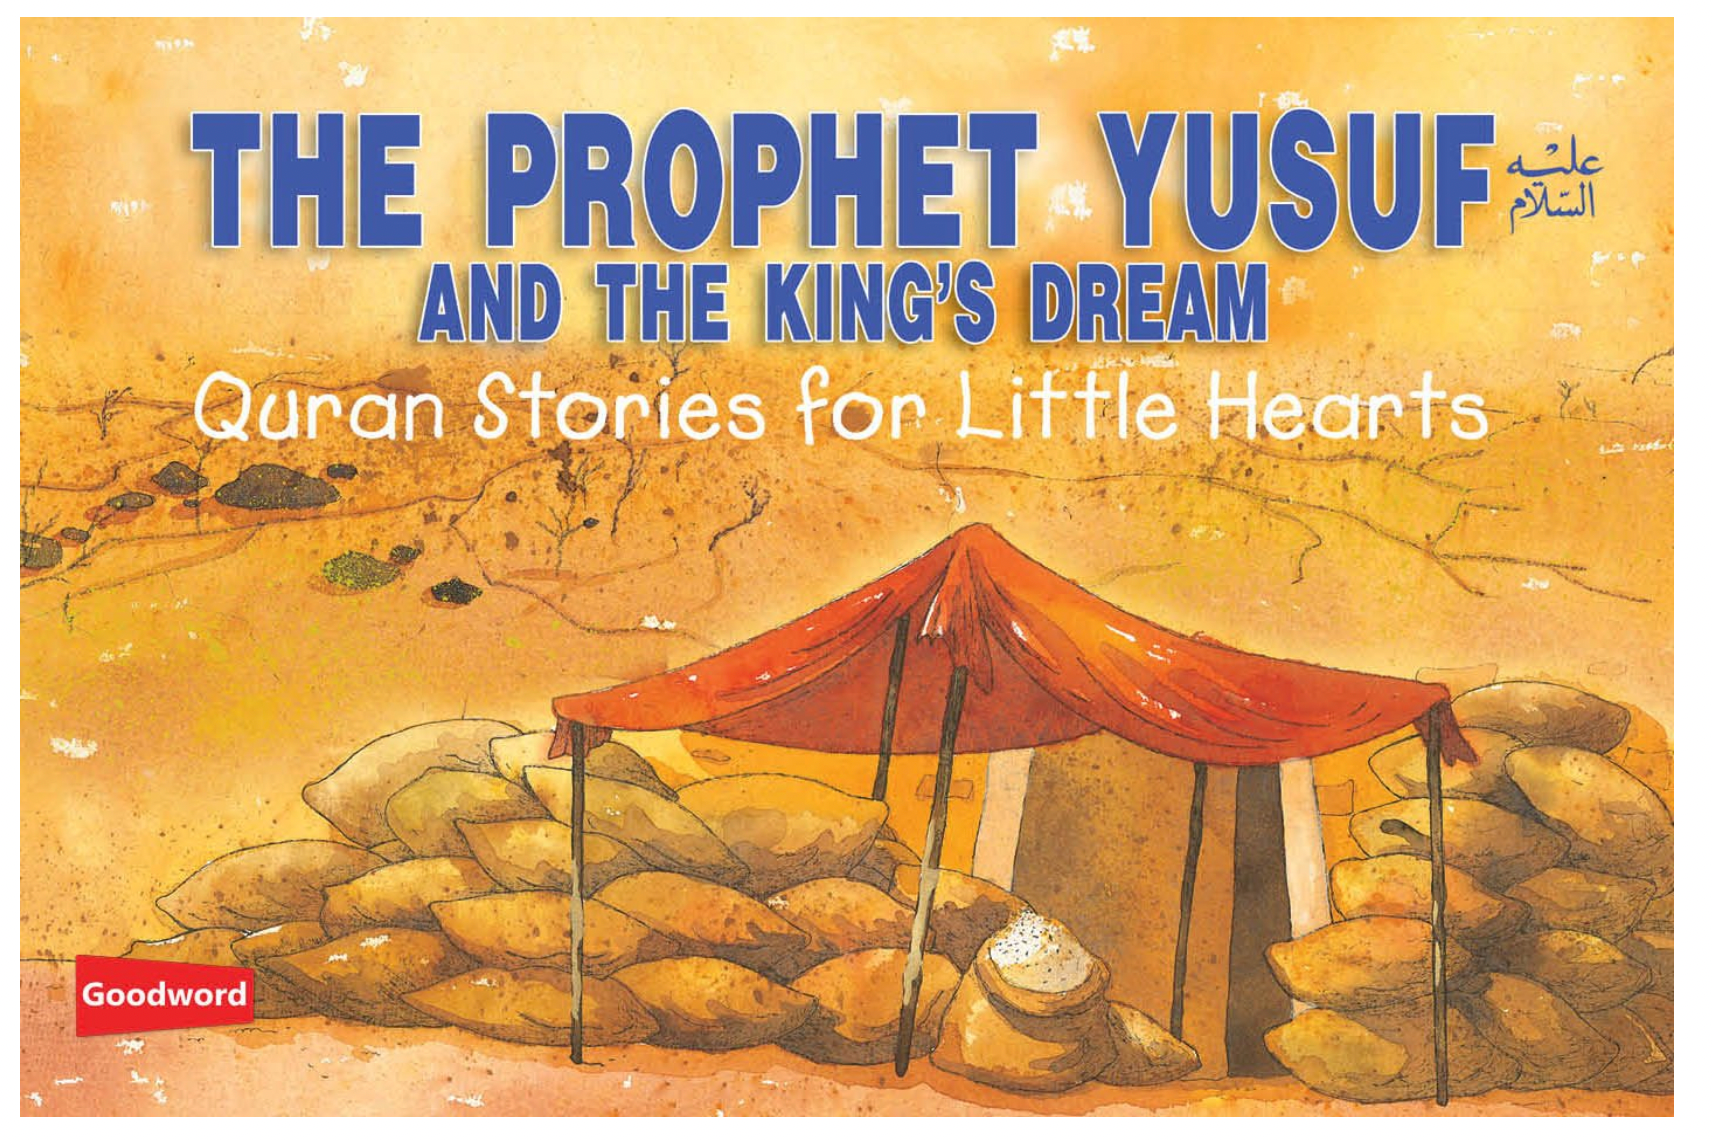 The Prophet Yusuf and the King's Dream